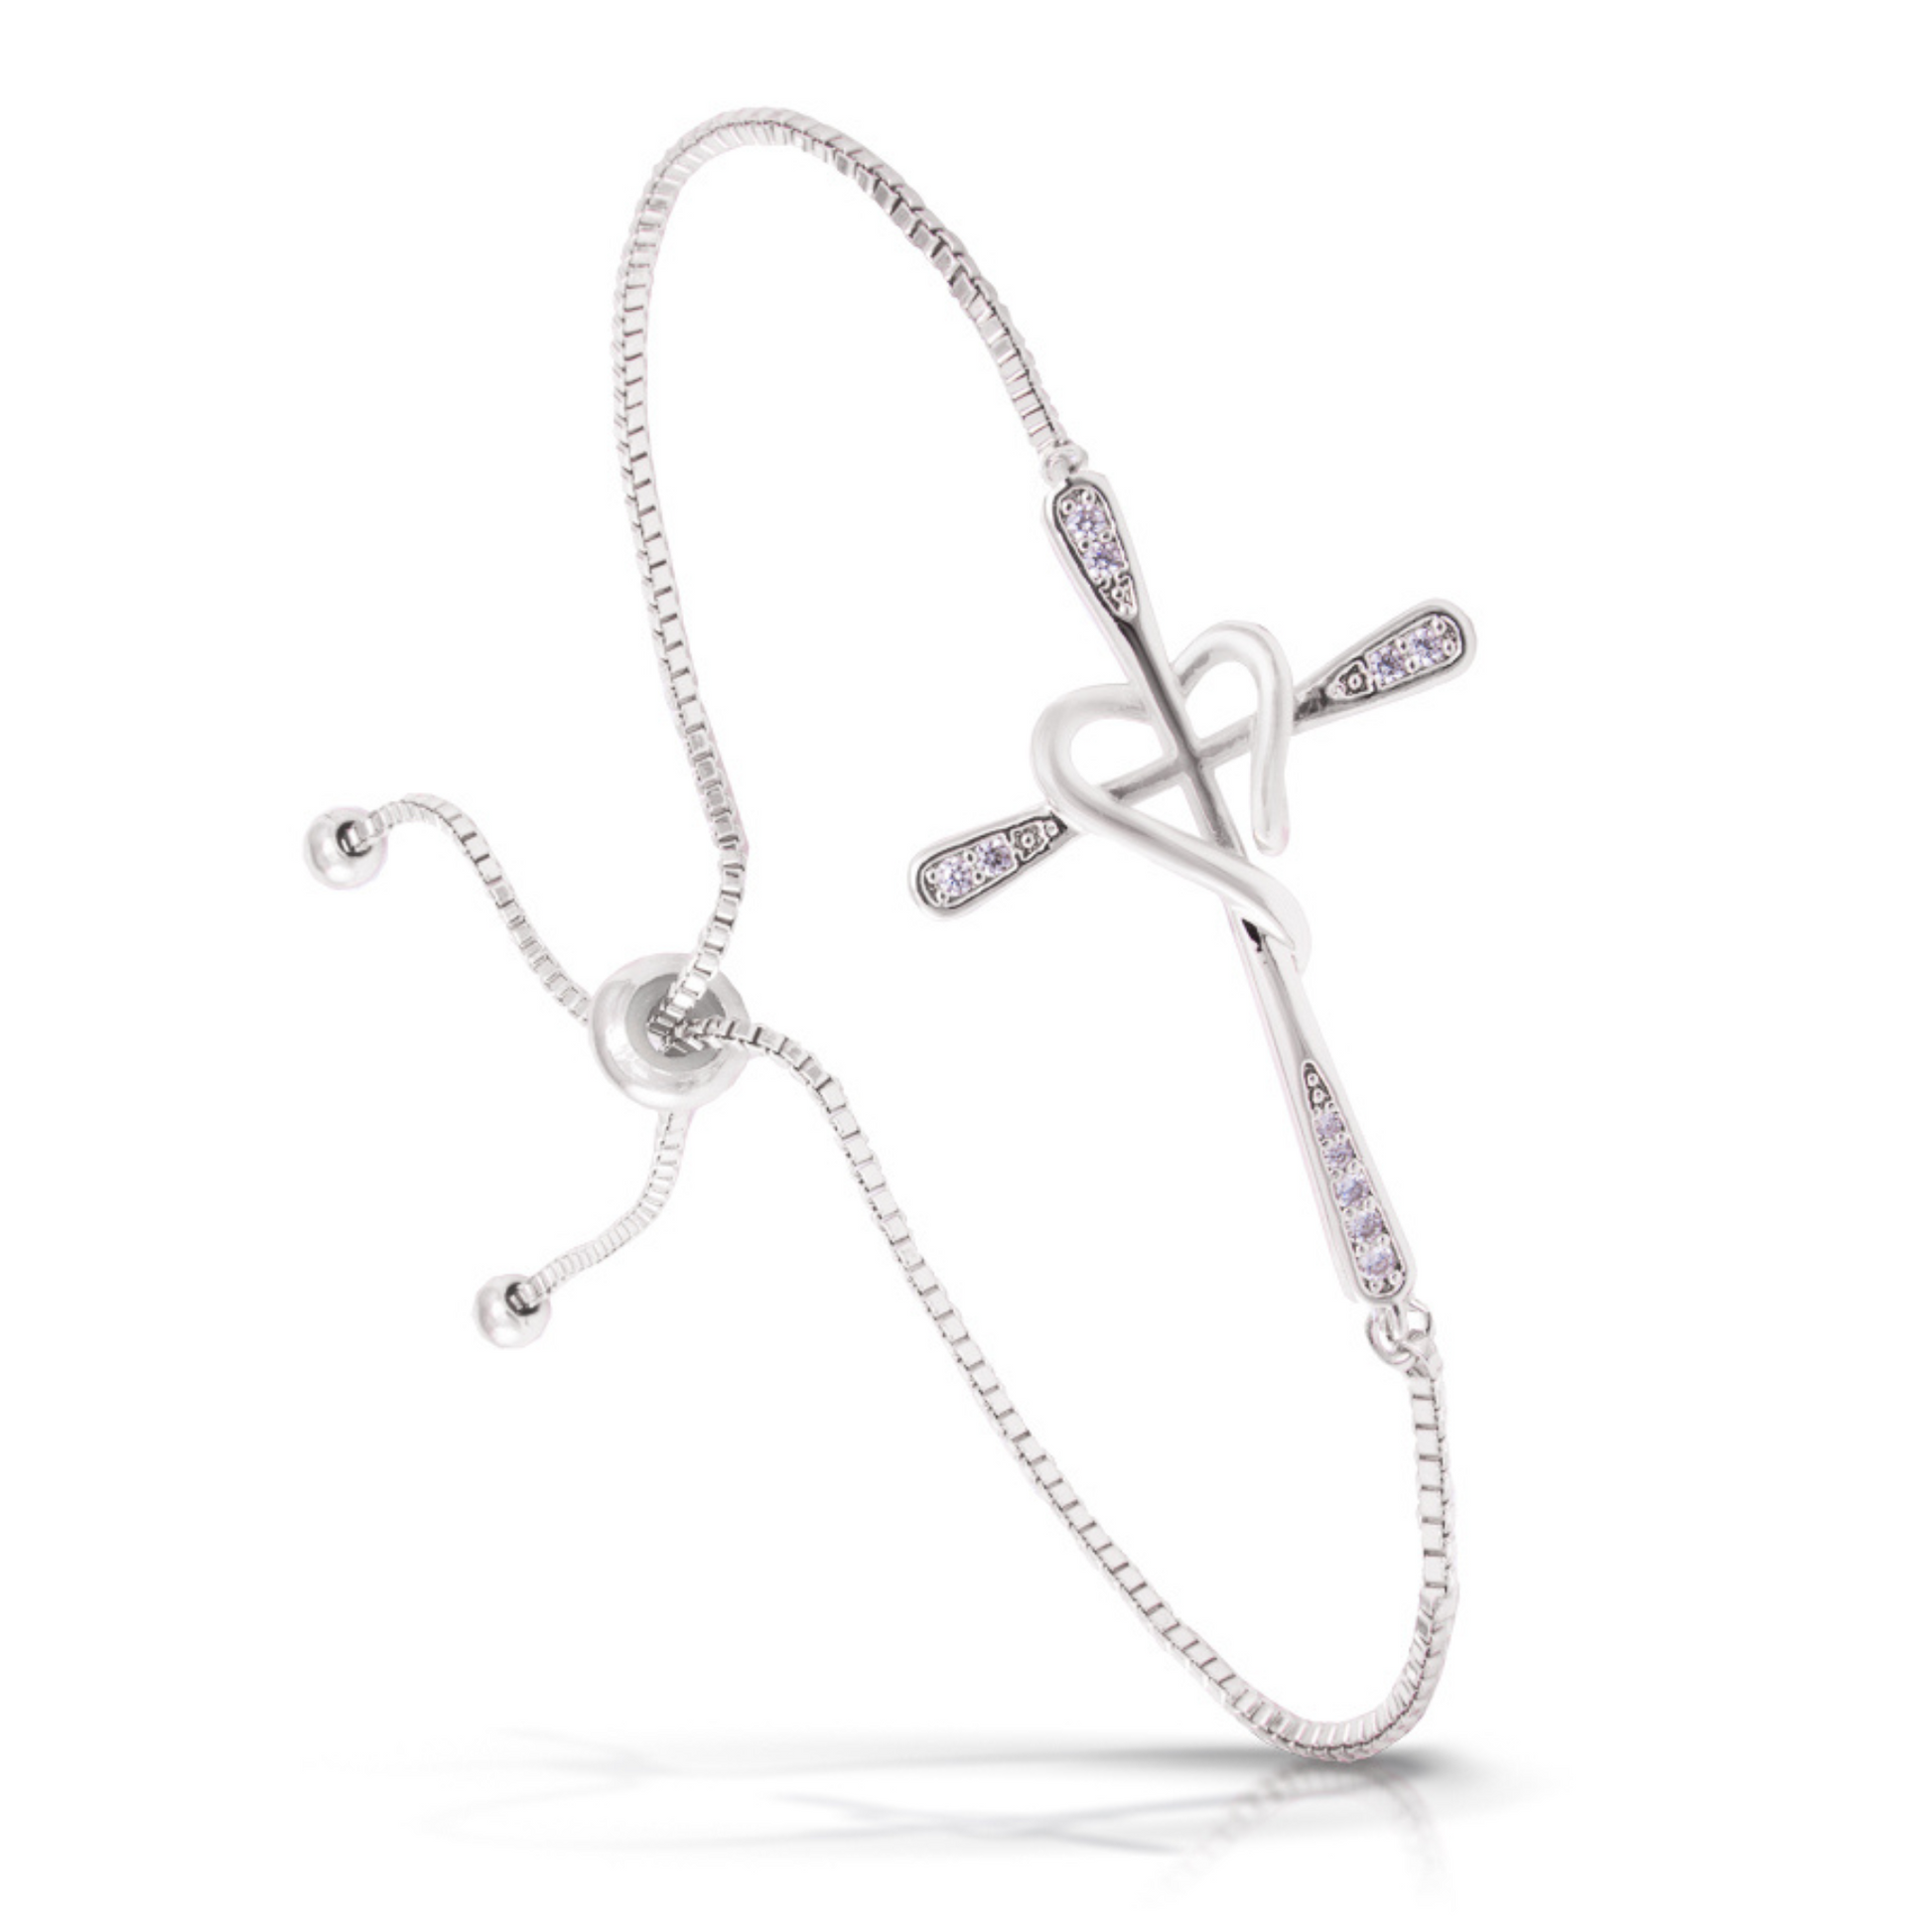 Expertly crafted with silver material, our Cross Heart Bracelet features a unique adjustable pull chord design adorned with a beautiful cross heart pendant and sparkling rhinestone accents. The perfect accessory for adding a touch of faith and elegance to any outfit.